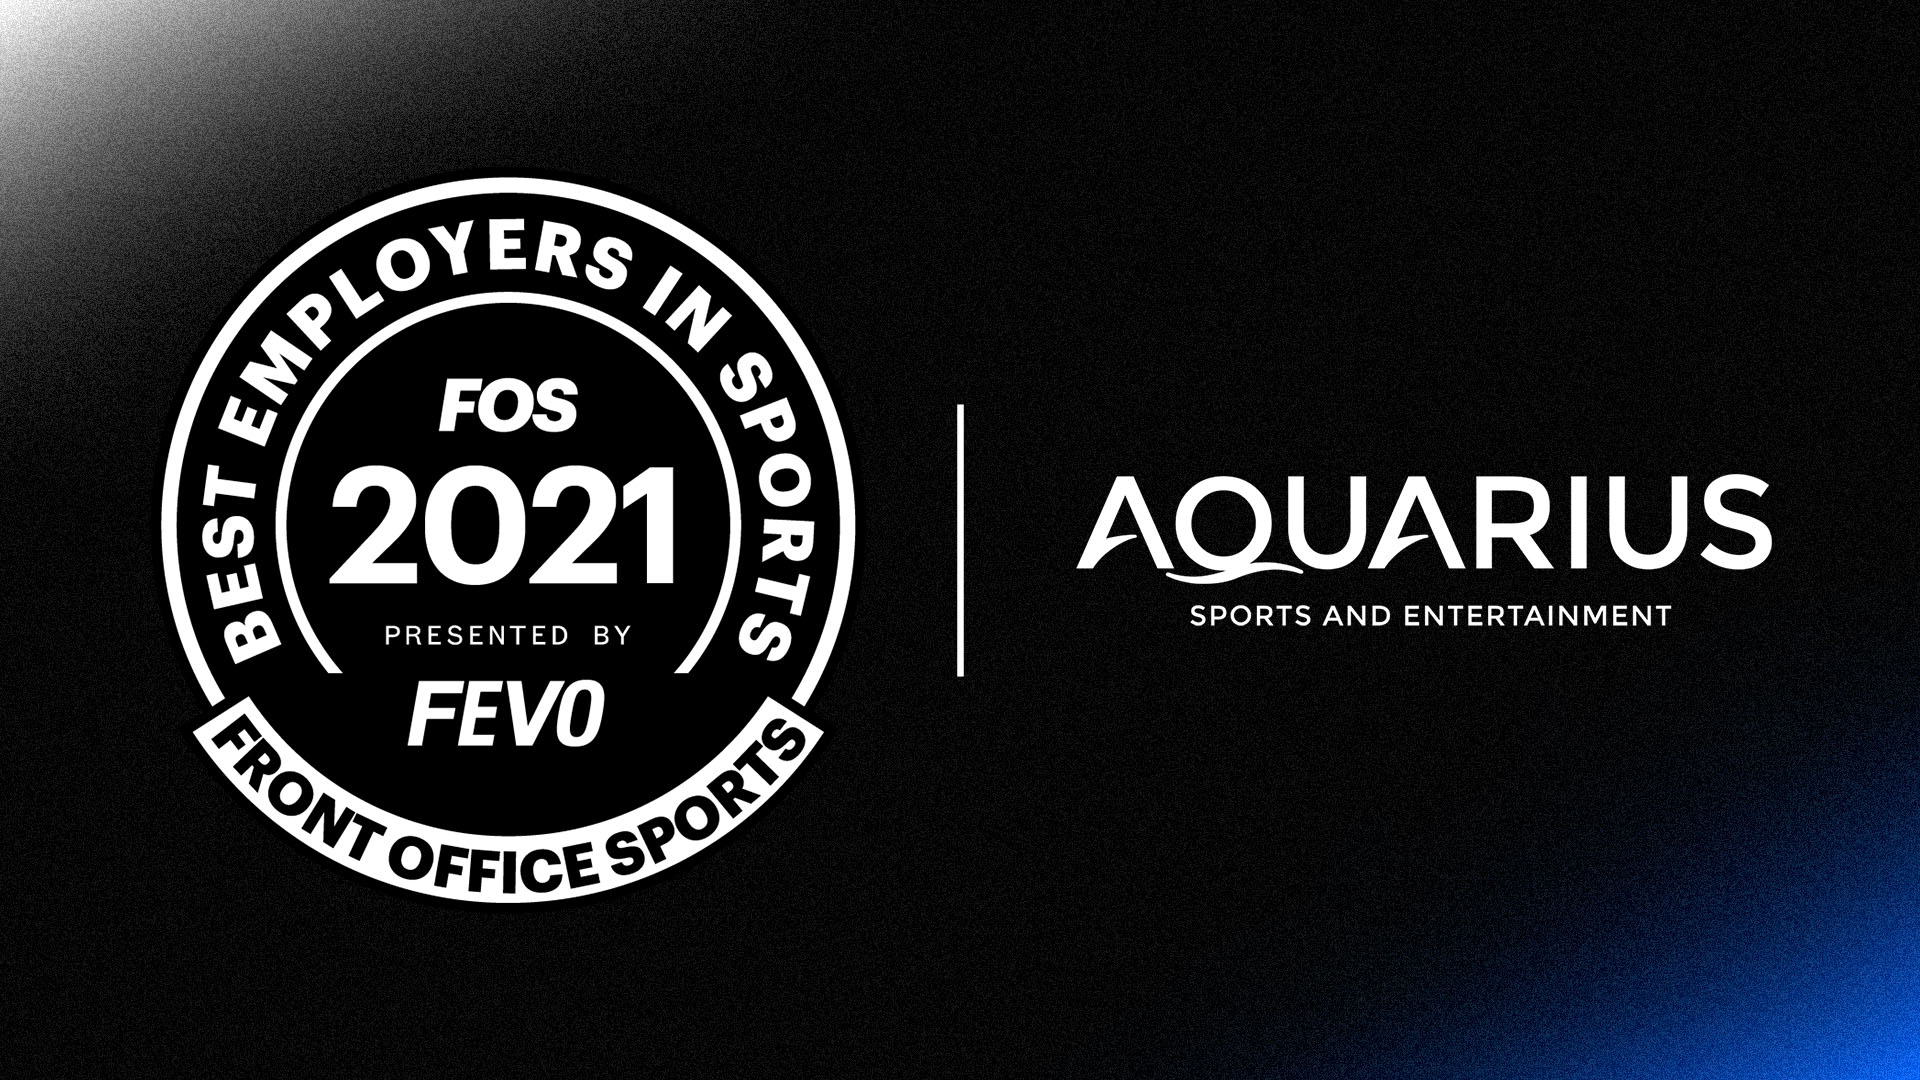 AQUARIUS SPORTS AND ENTERTAINMENT NAMED A FRONT OFFICE SPORTS 2021 BEST EMPLOYER IN SPORTS